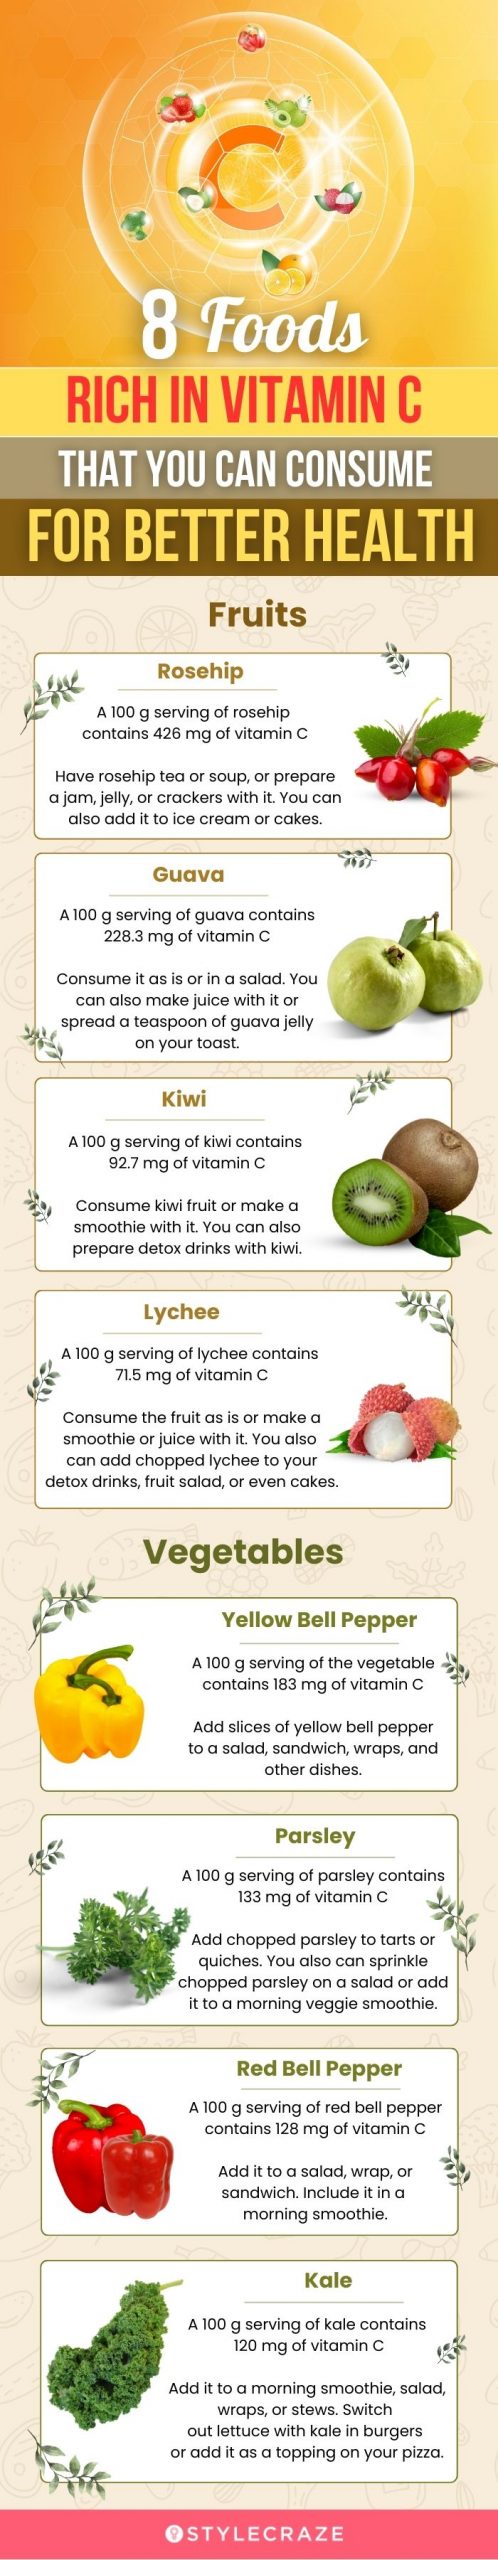 8 foods rich in vitamin c that you can consume for better health (infographic)